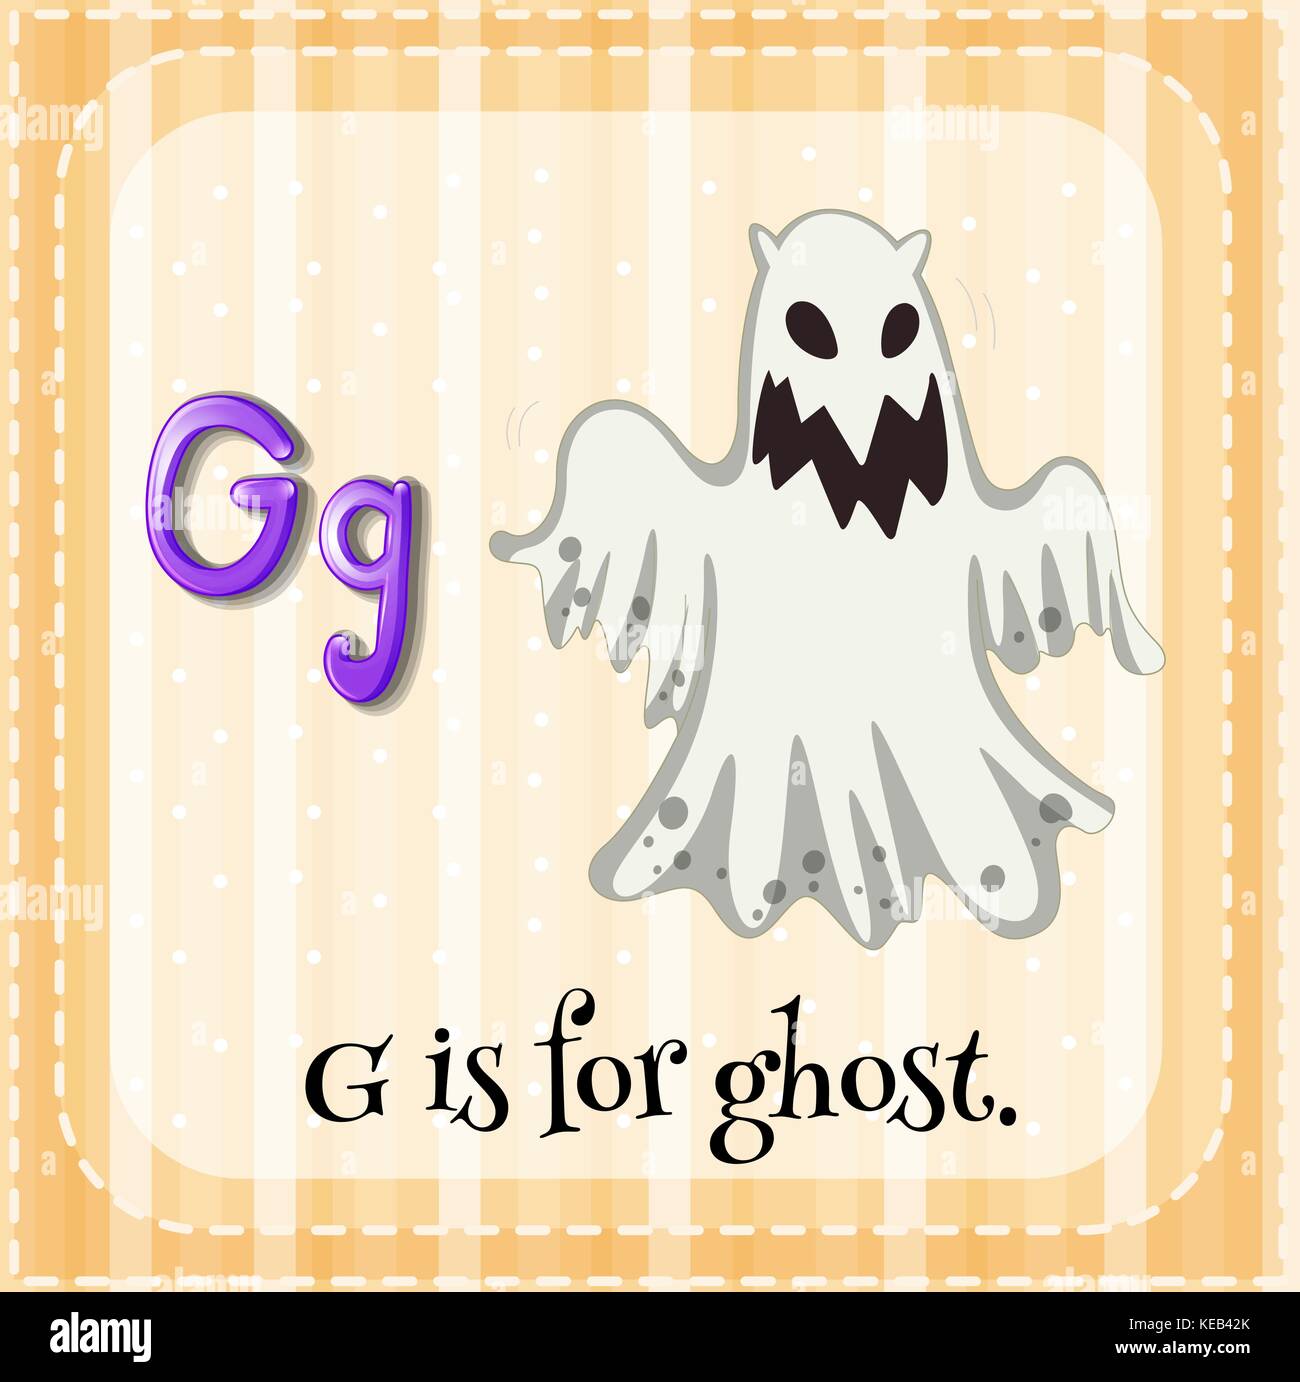 Ghost Letters Stock Photos & Ghost Letters Stock Images  Alamy